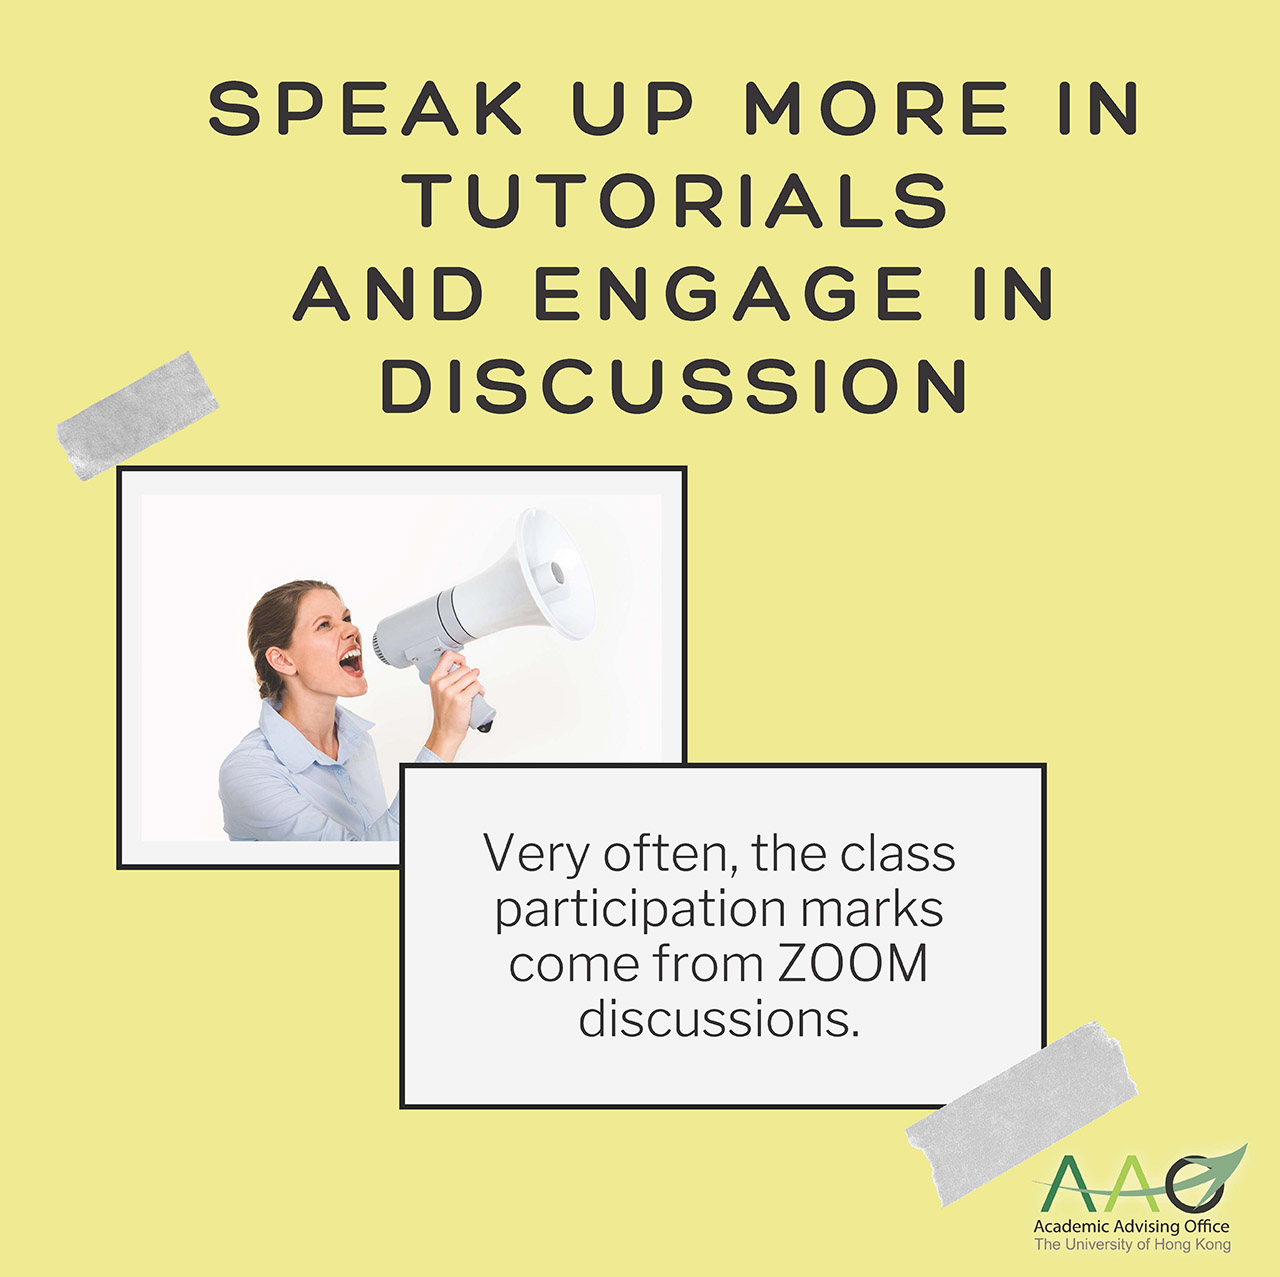 Speak up more in tutorials and engage in discussion: Very often, the class participation marks come from ZOOM discussions.